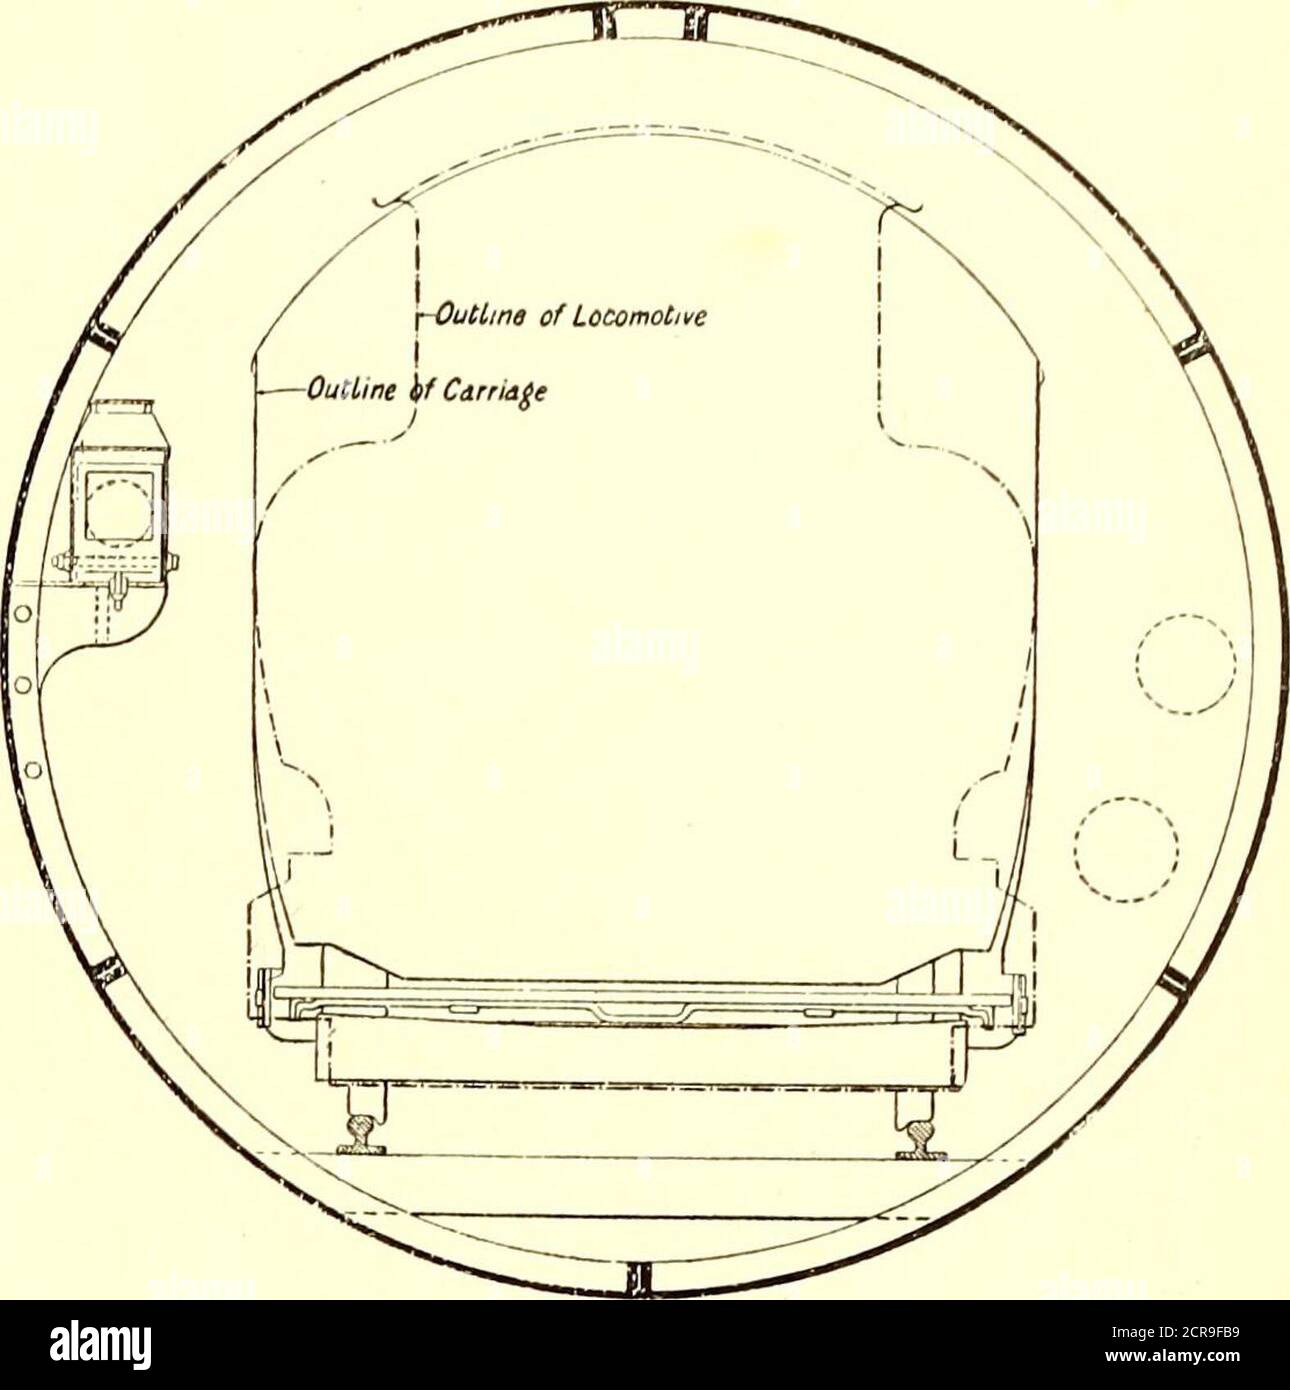 . The Street railway journal . e shape of the cab, which in the case of 15and 17 is bulged at the sides, instead of straight as in the case ofNo. 12. LEADING DIMENSIONS Feet. Inches. Gage 4 8% Over all height above rail level 8 5% Over all length, buffer to buffer 14 0 Extreme width 6 10 Wheel base .. 6 0 Diameter of wheels 2 3 Width of tires 0 4% Each locomotive has two motors, the armatures of which arefixed directly on the axles. The motors are arranged in series,and the regulating gear consists of a reversing switch, whichchanges the armature connections, a simple rheostat switch inseries Stock Photo